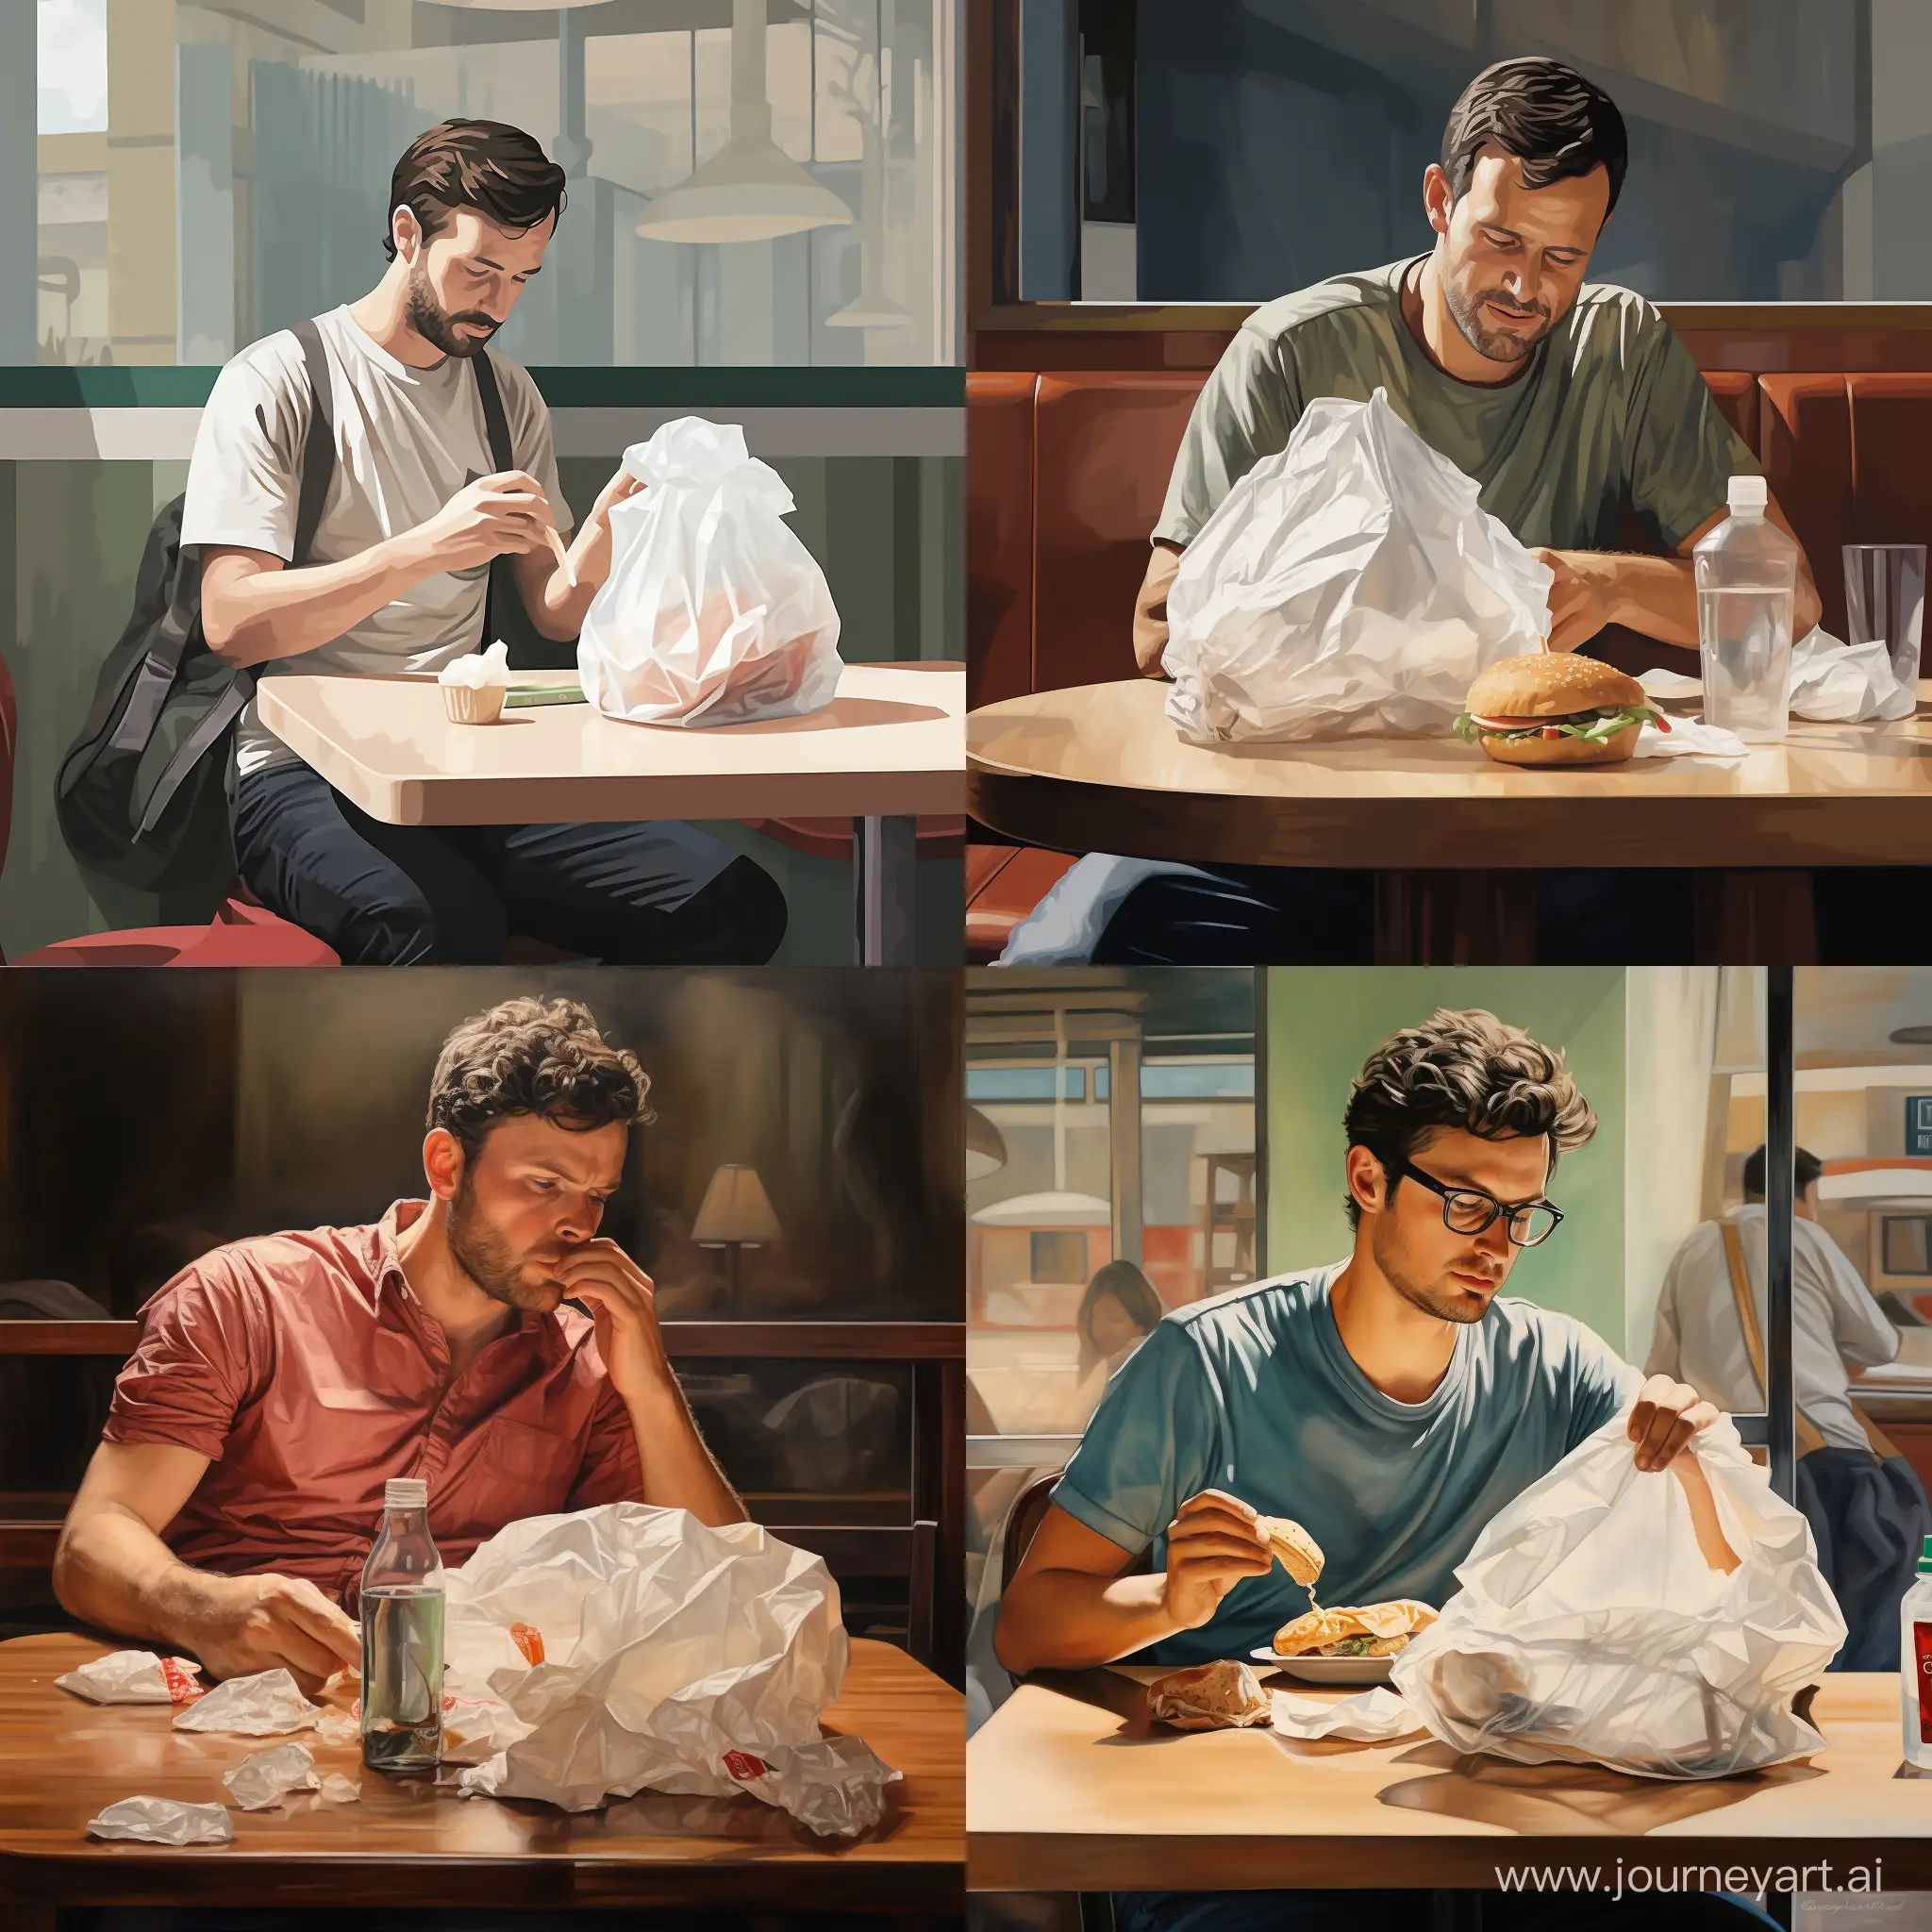 Surprising-Encounter-Plastic-Bag-in-Place-of-a-Classic-Hamburger